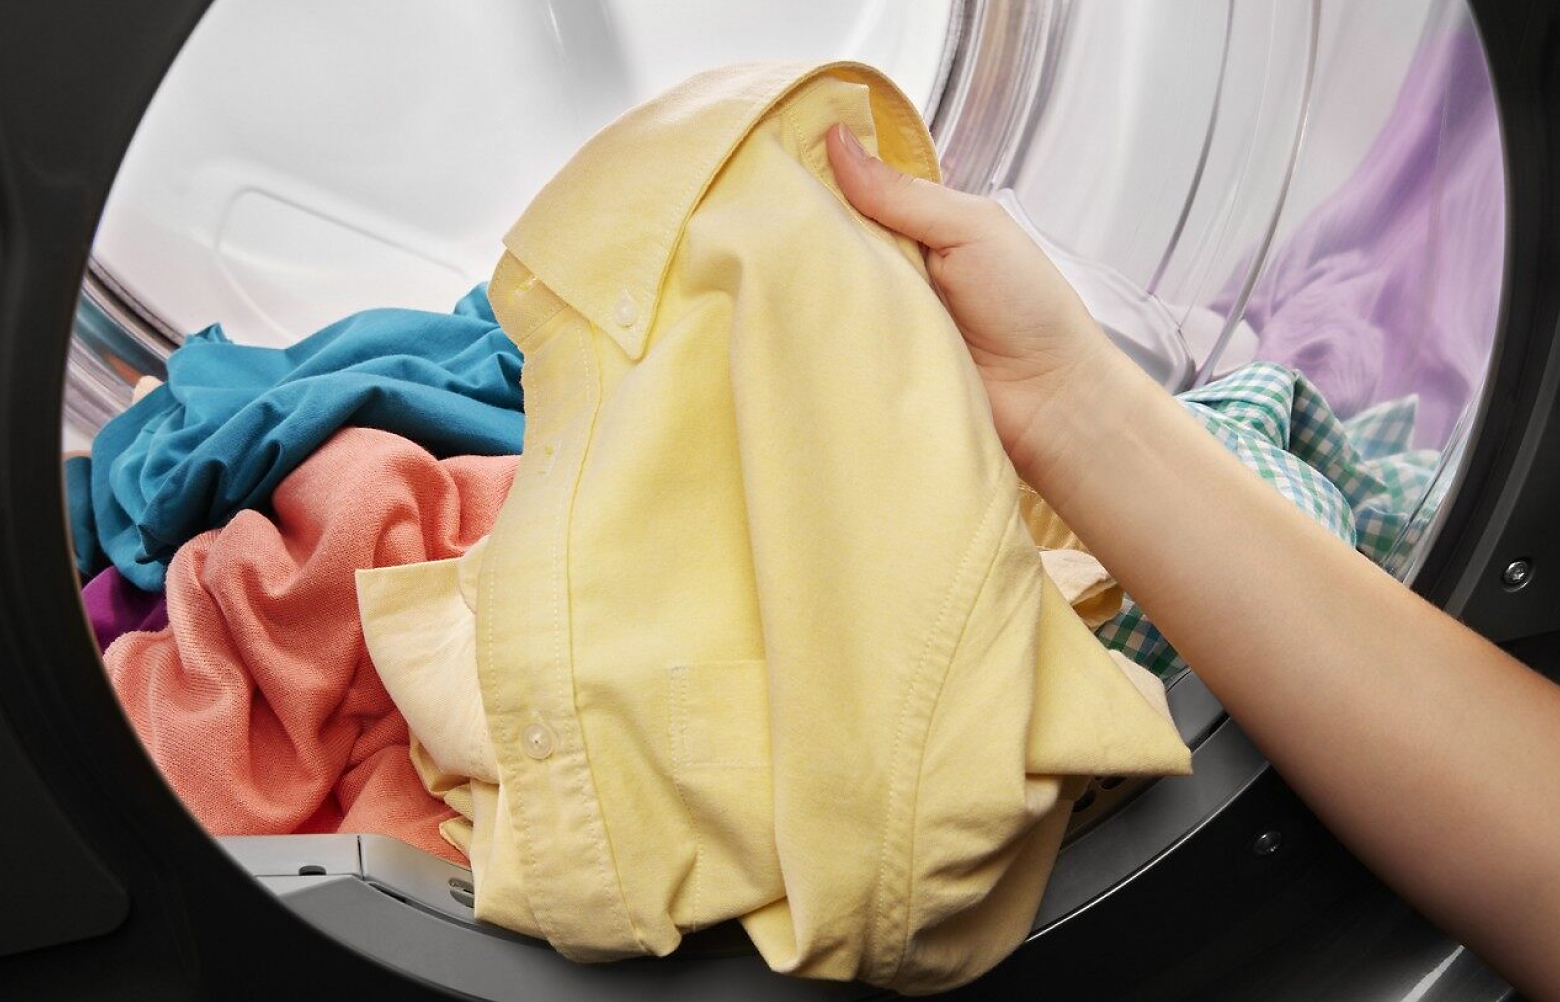 Hand pulling yellow shirt out of a dryer